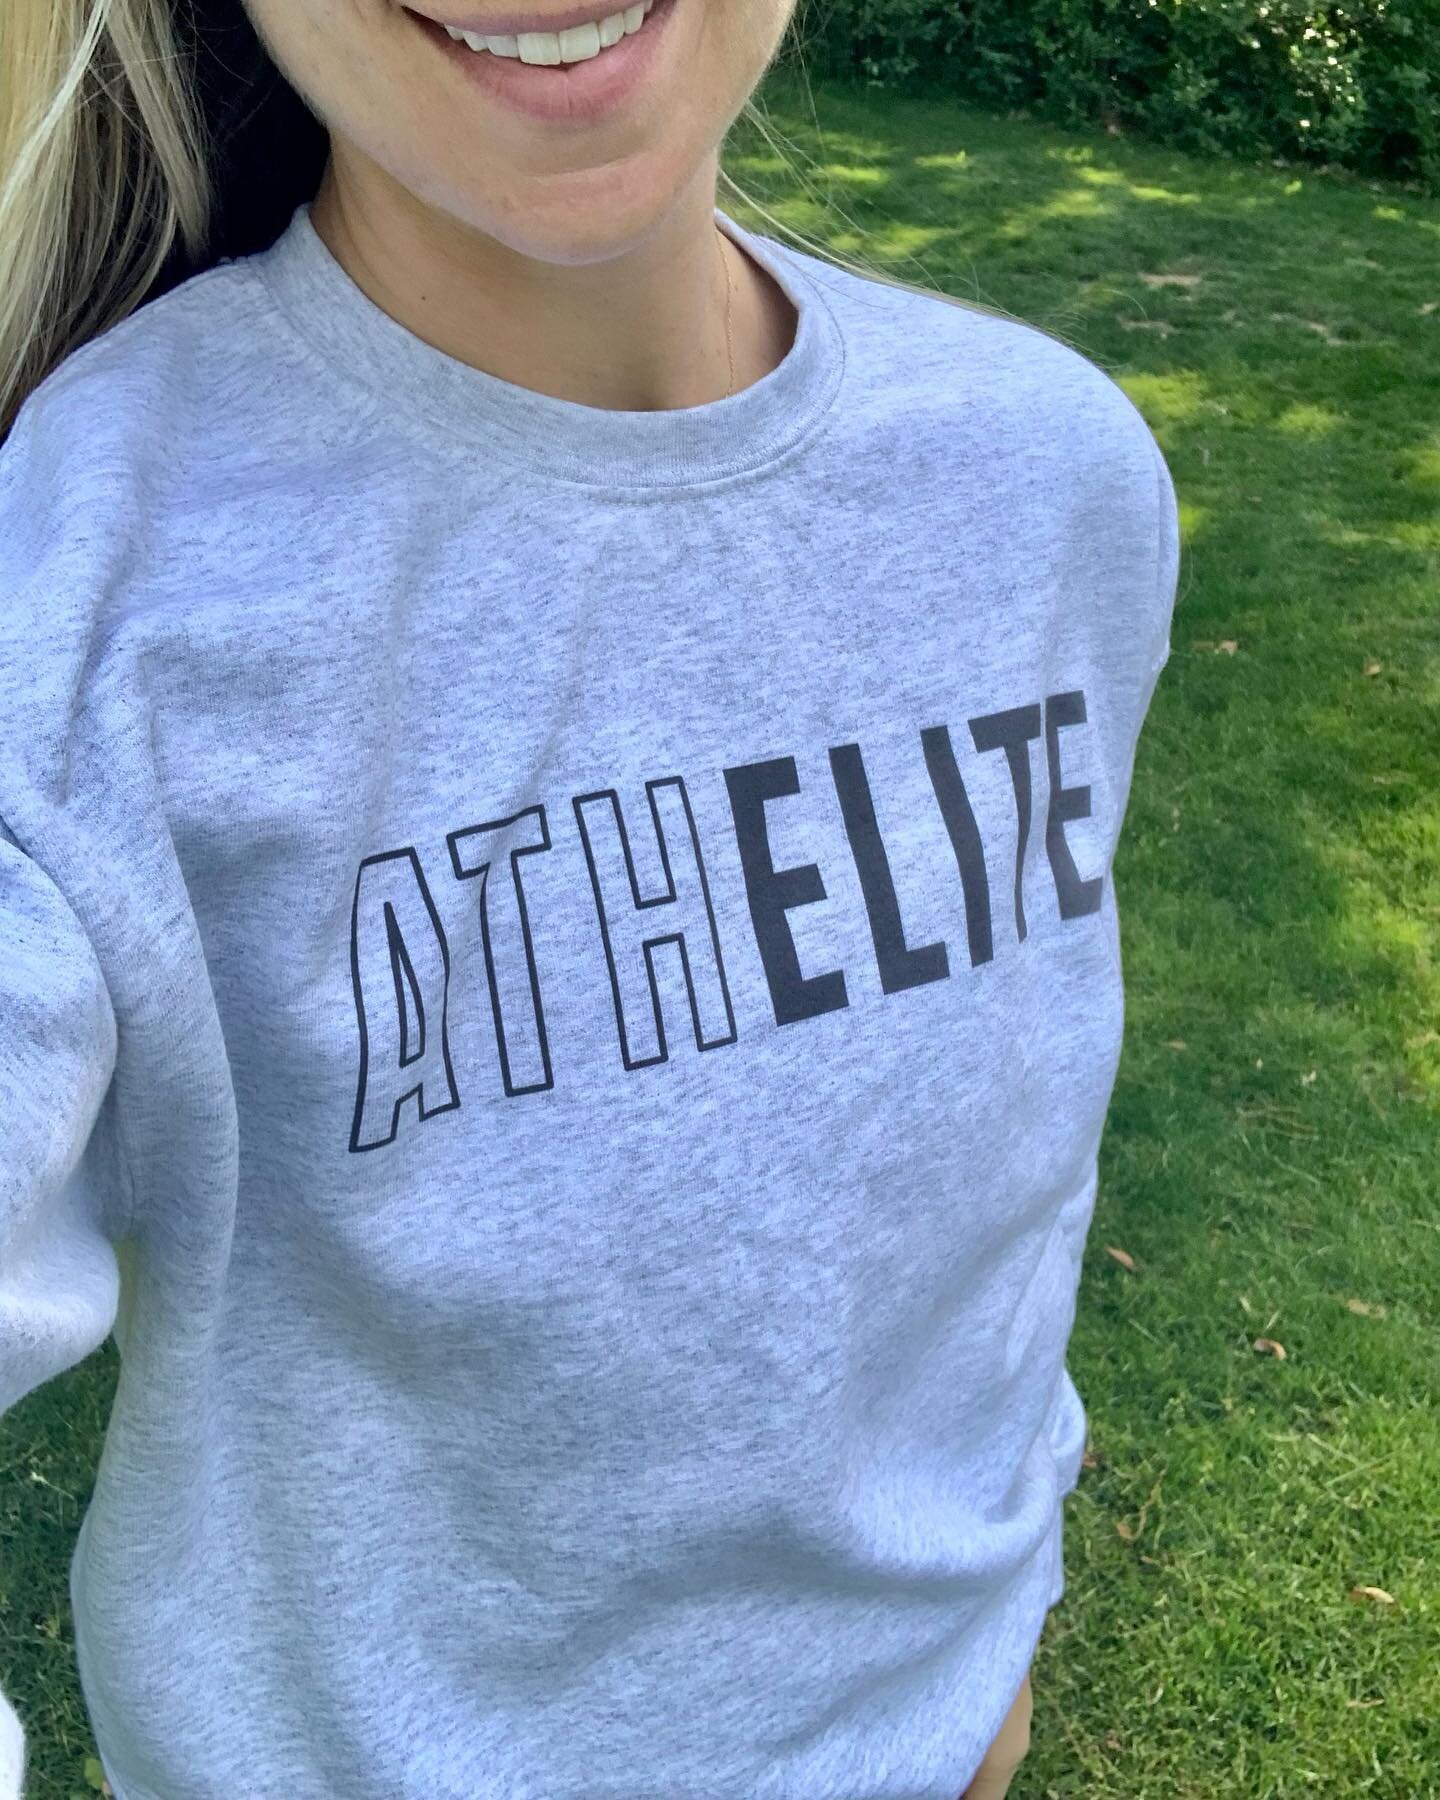 Warm up with us on a cool spring morning! 

Our Women&rsquo;s Crewneck Sweatshirt is perfect for those crisp mornings.

Shop our ATHELITE gear for effortless movement and style. Link in bio!